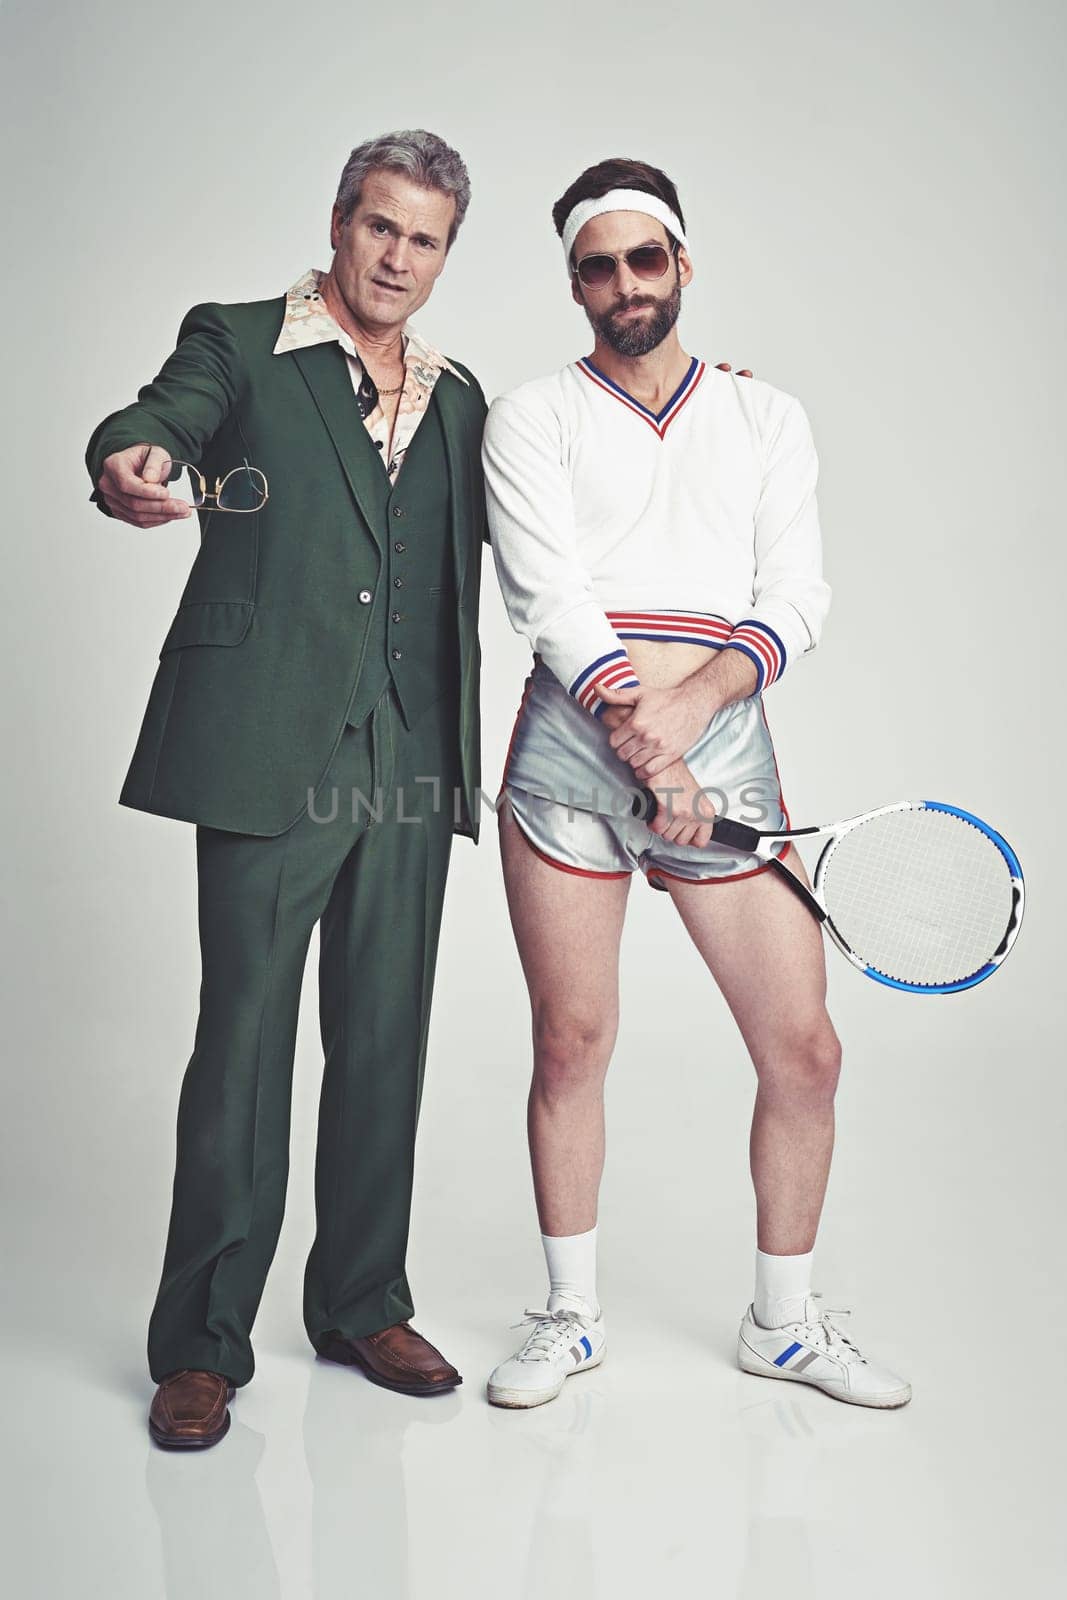 Men, retro and fashion with confidence in studio on white background and smart look with suit and tennis racket. Vintage style and glamour with trends for outfit, elegance and clothes with class.